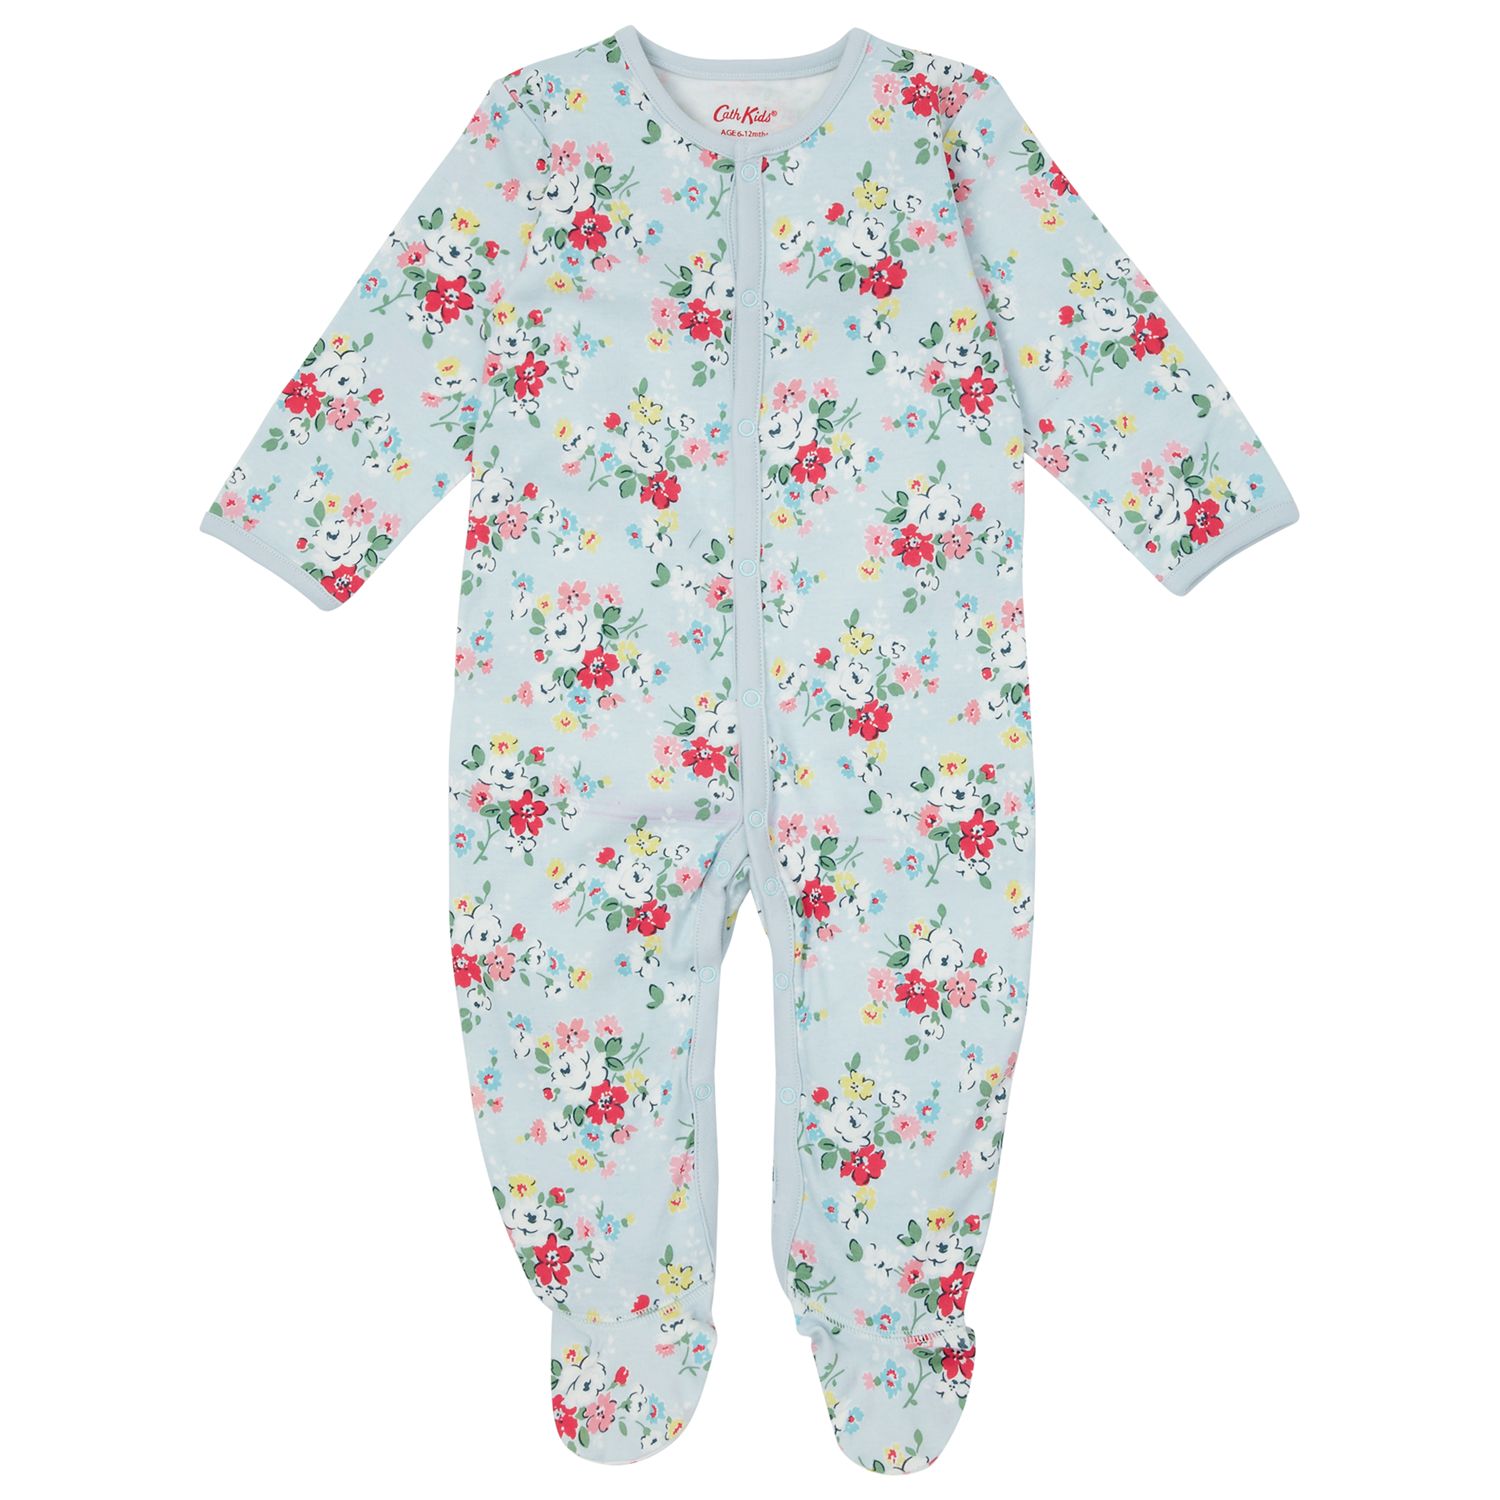 cath kidston baby clothes sale